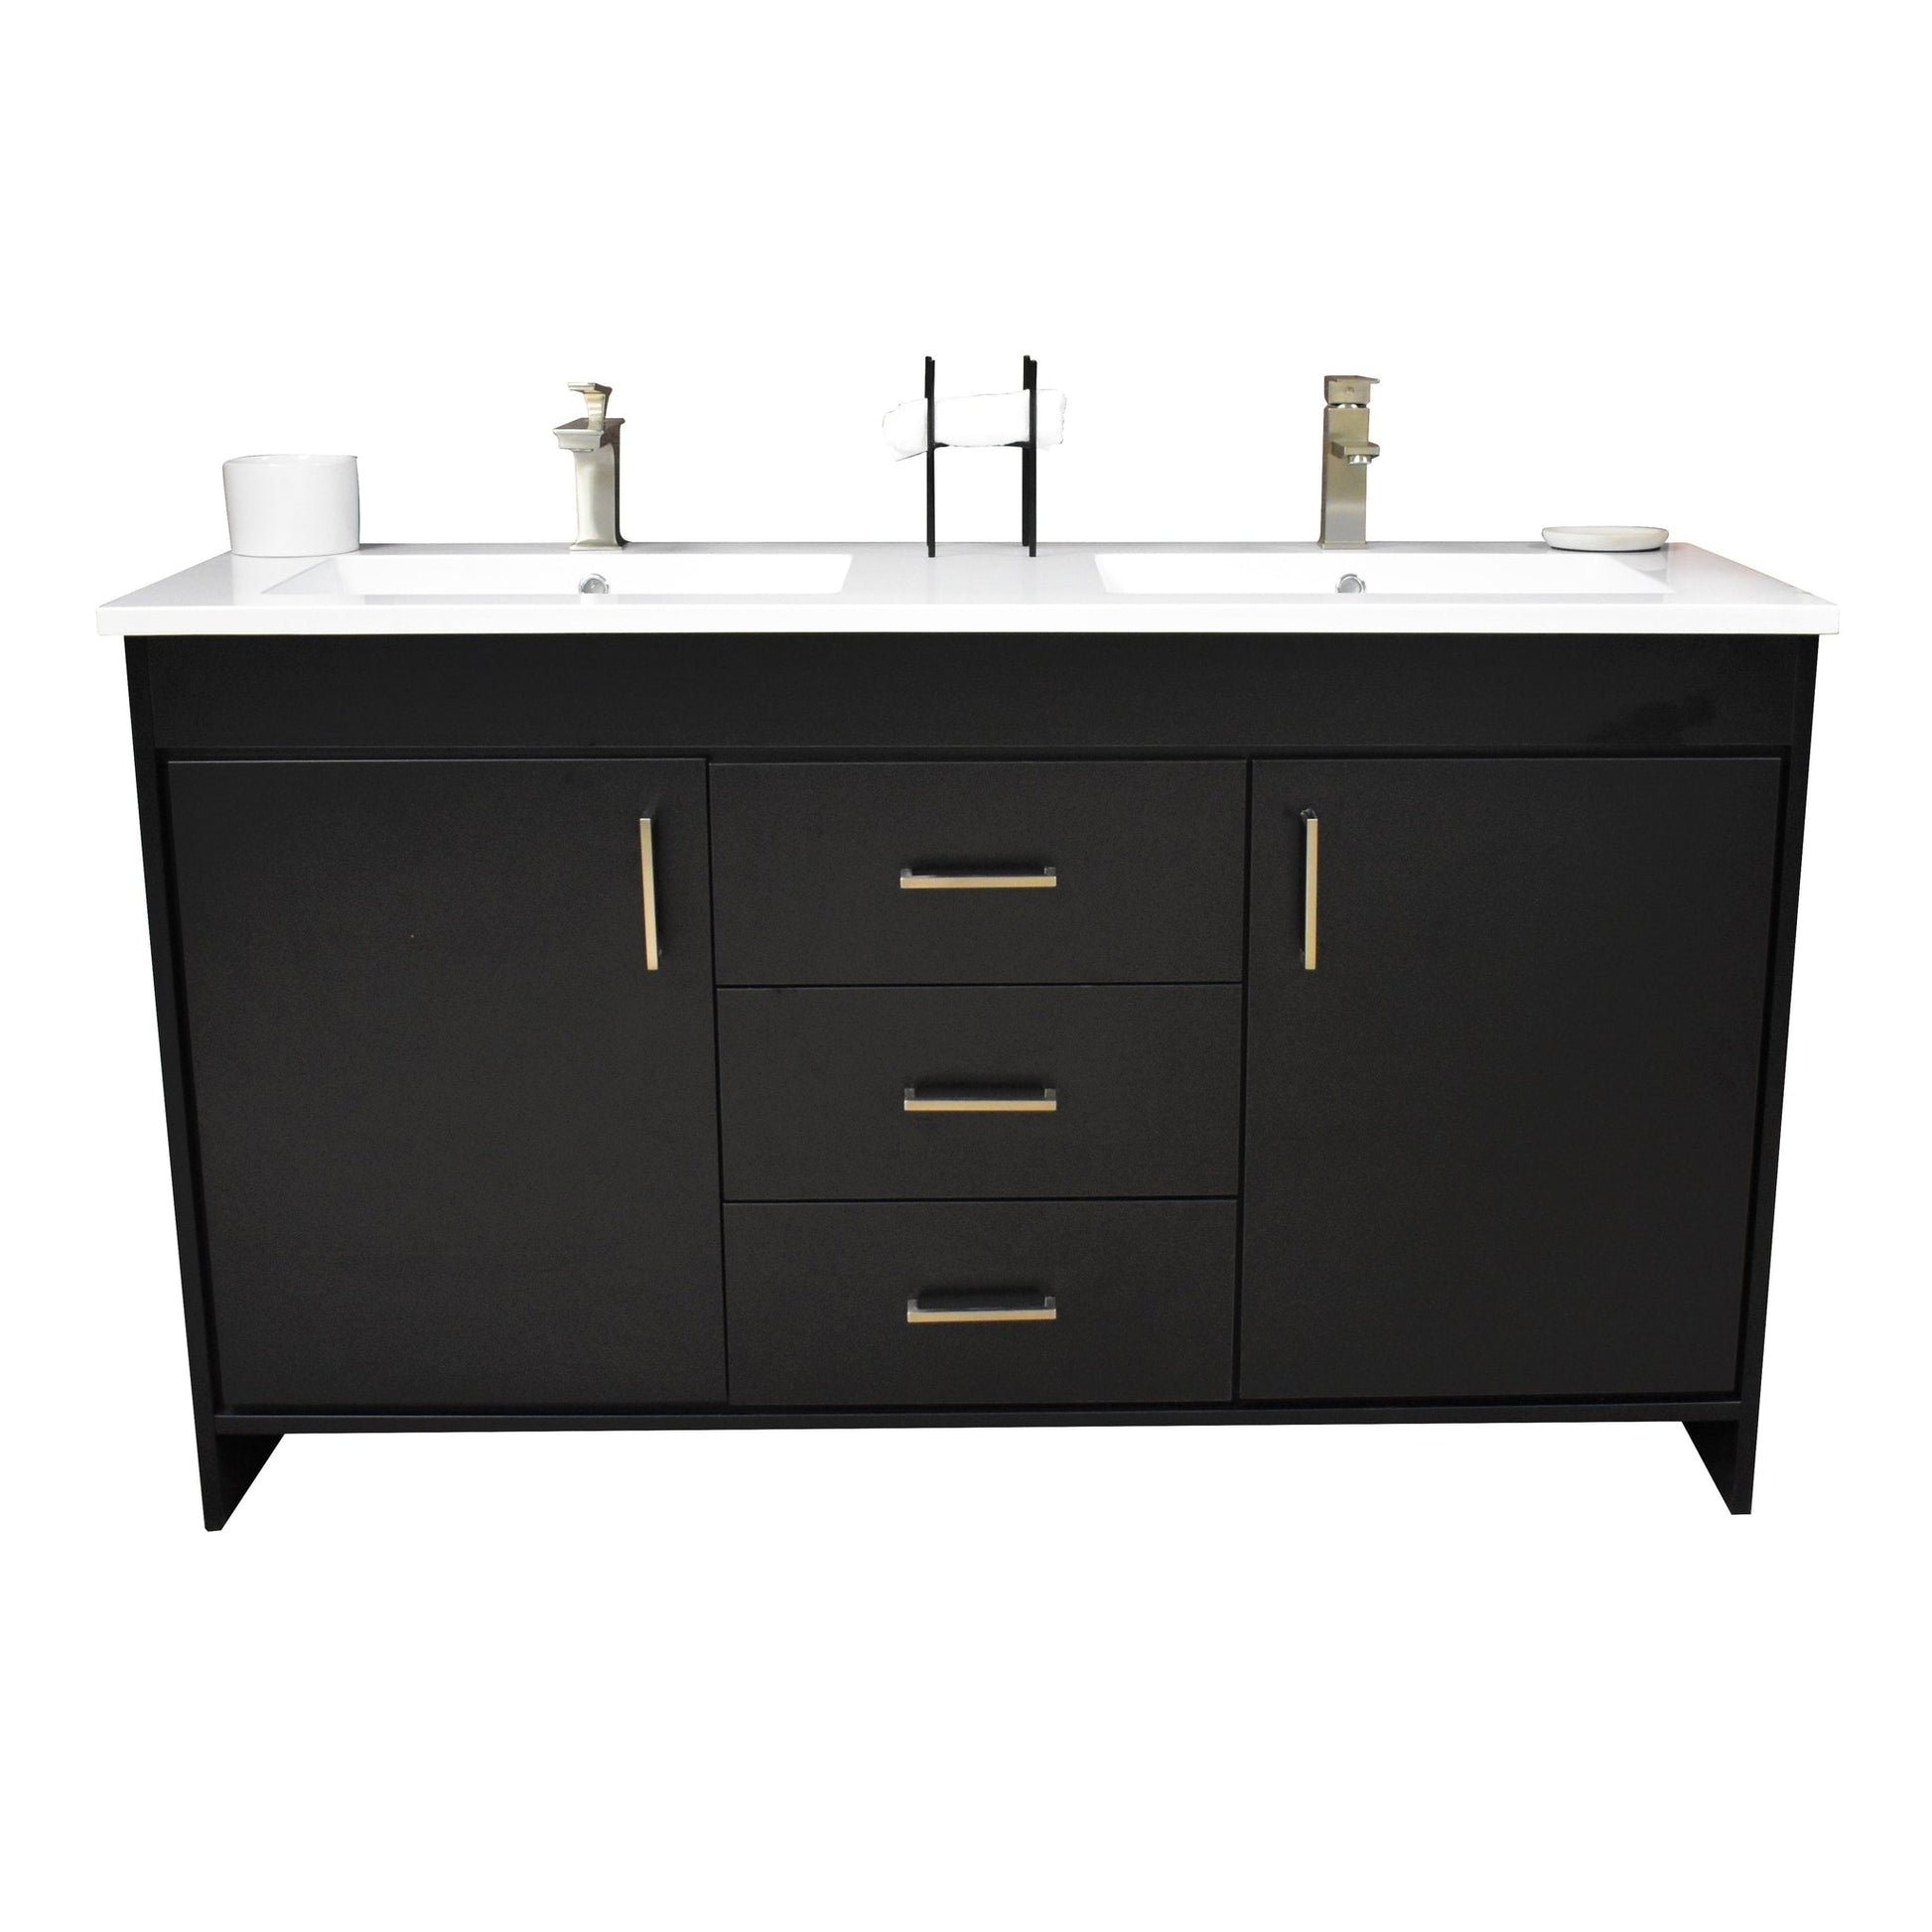 https://usbathstore.com/cdn/shop/products/Volpa-USA-Rio-60-Black-Freestanding-Modern-Bathroom-Vanity-With-Integrated-Acrylic-Double-Sink-Top-and-Brushed-Nickel-Handles.jpg?v=1659895693&width=1946